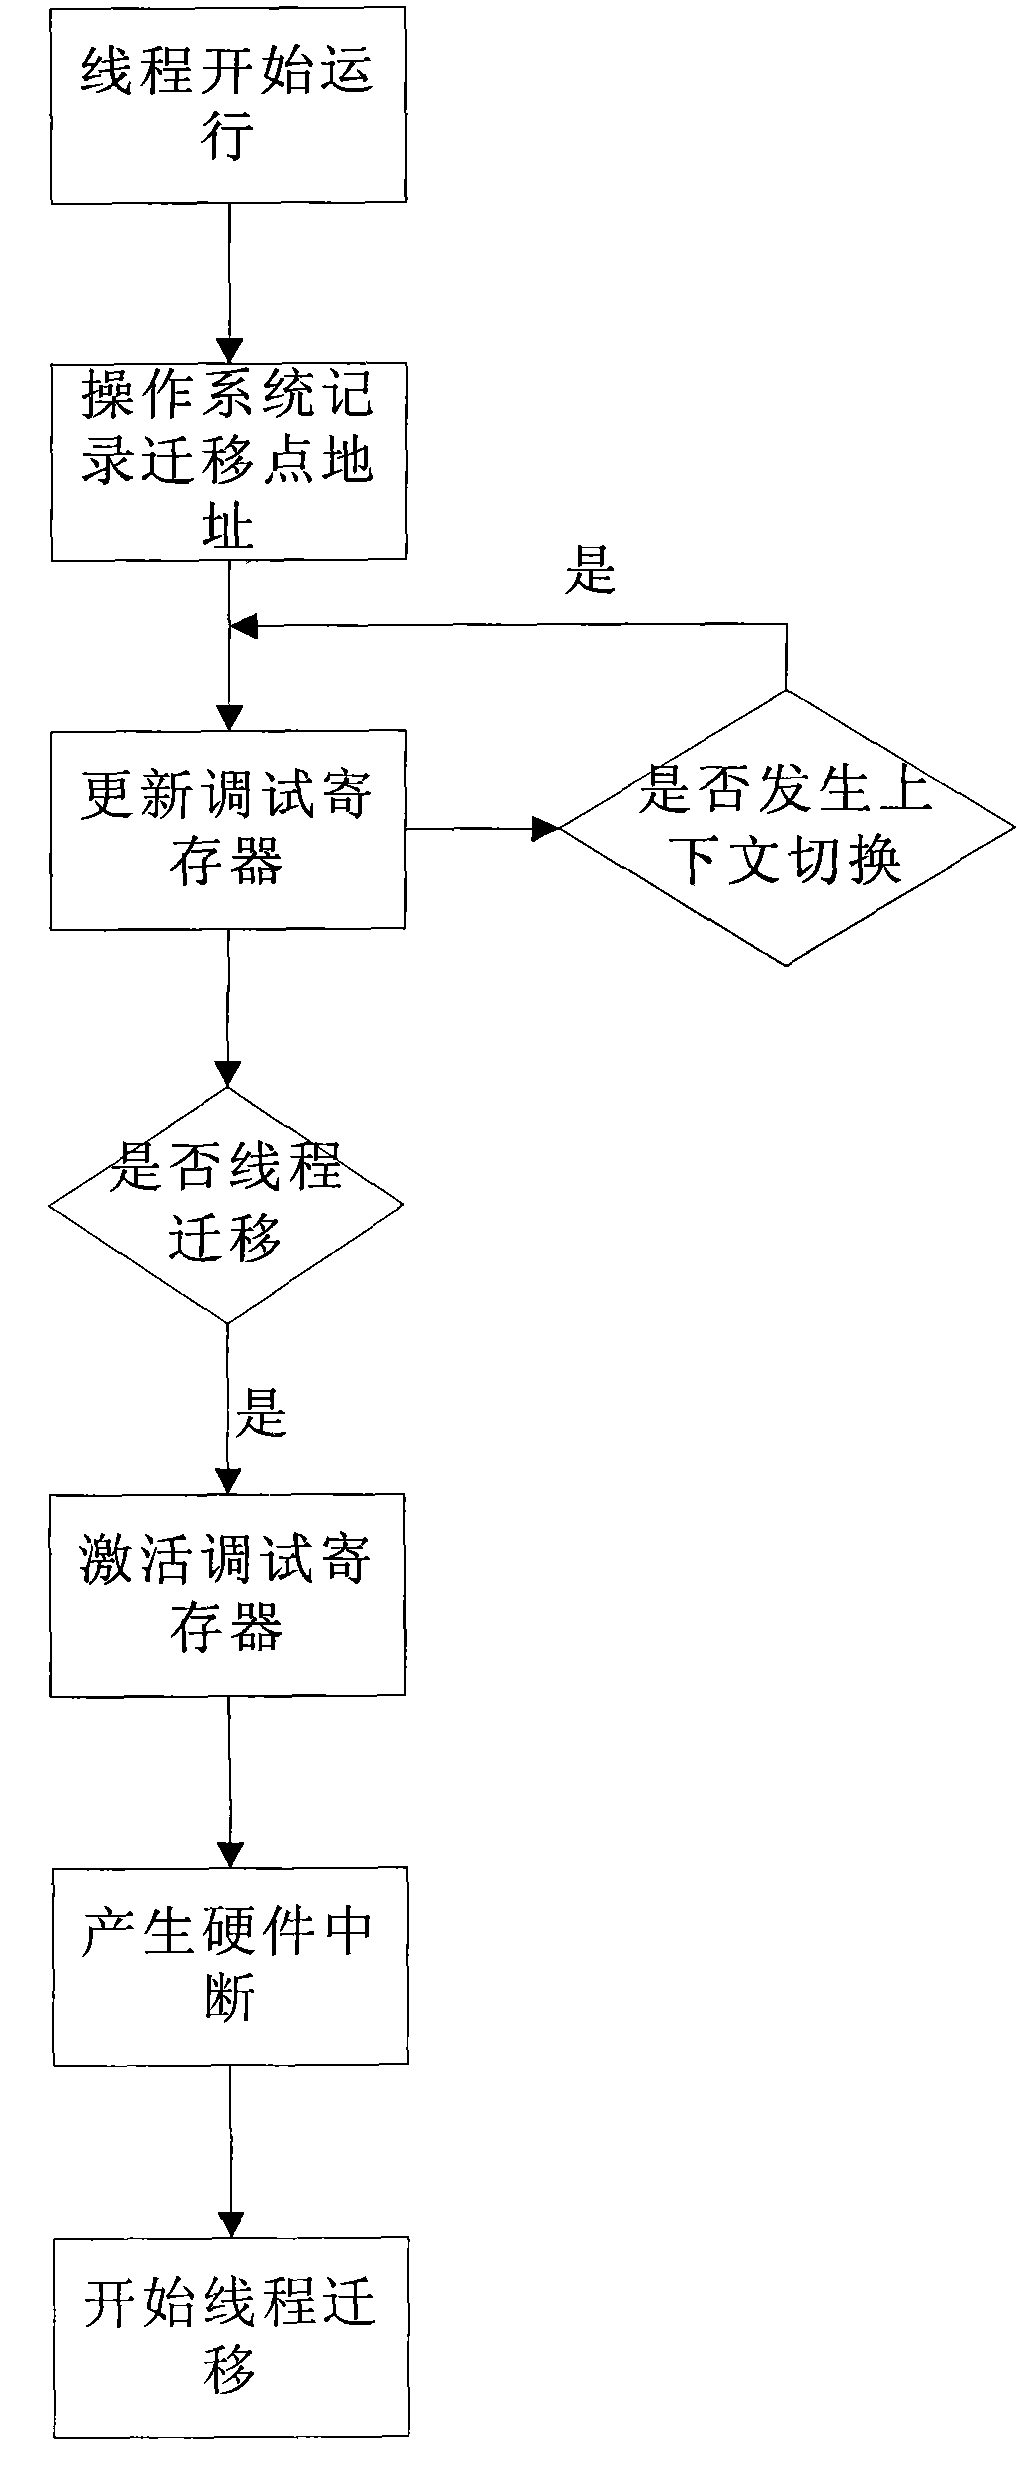 Multi-core processor oriented real-time thread migration method